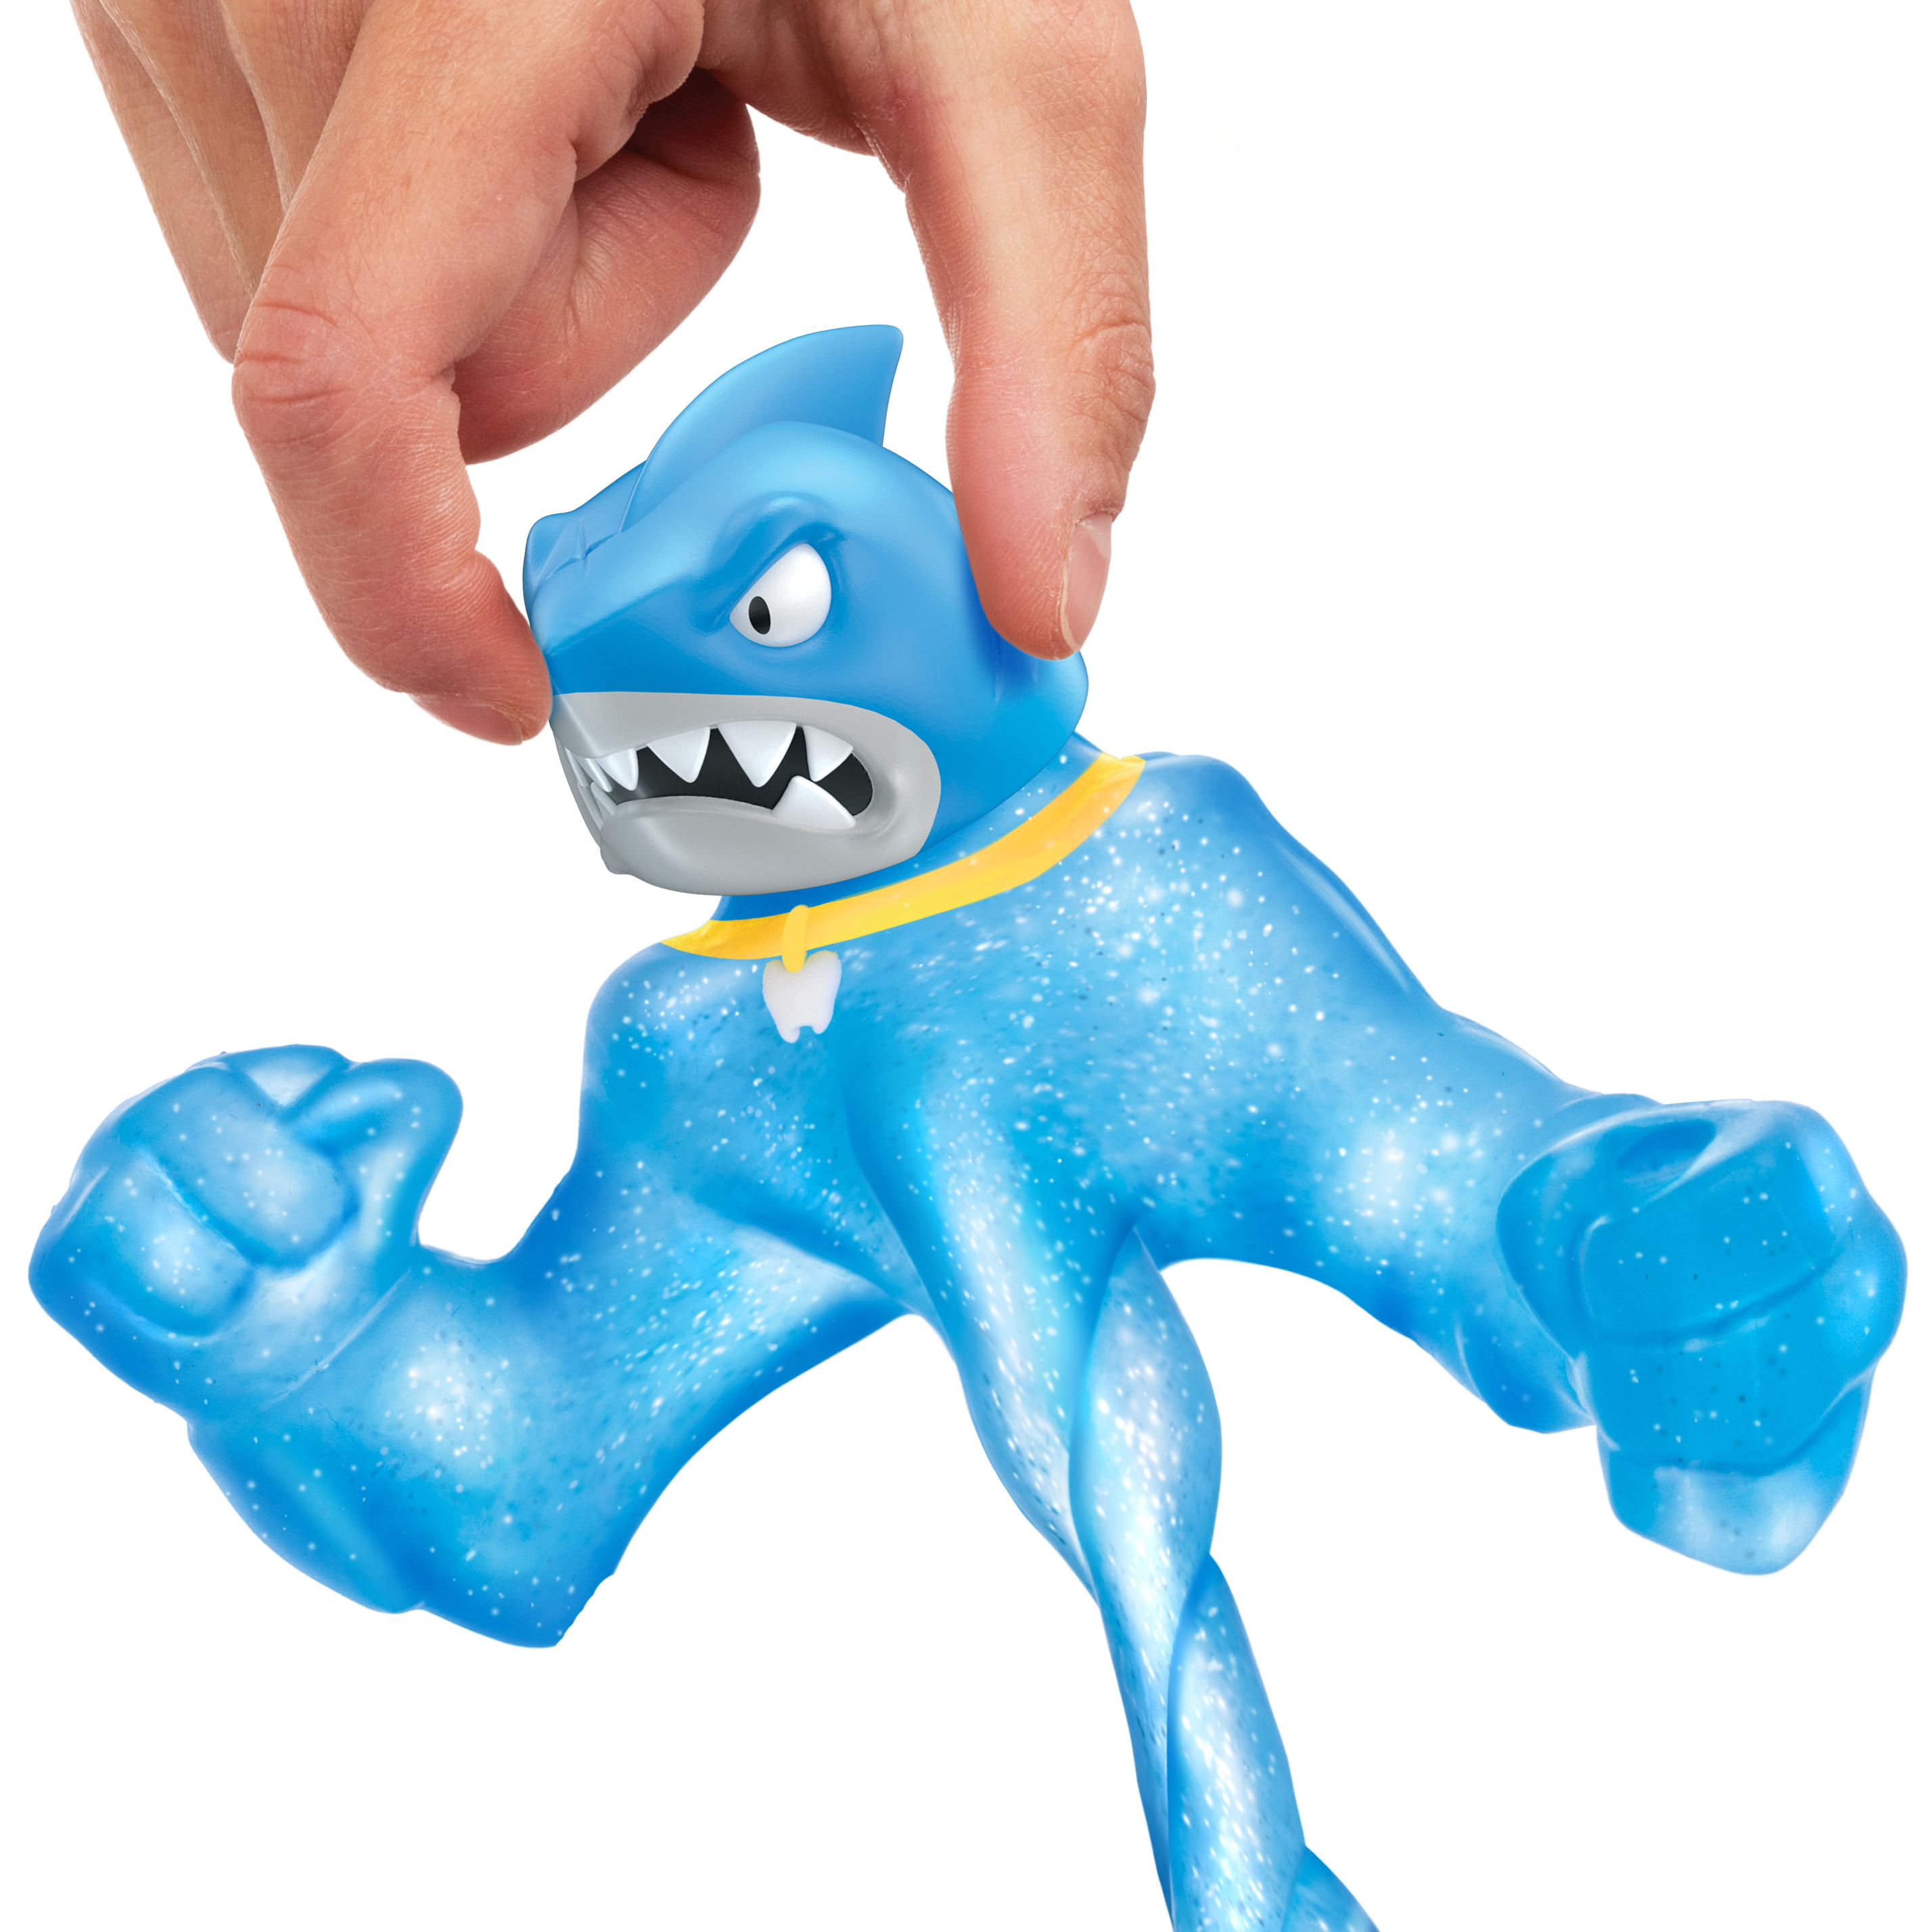 Thrash vs Rockjaw Details about   Heroes of Goo Jit Zu Super Stretchy 2-Pack Action Figures 